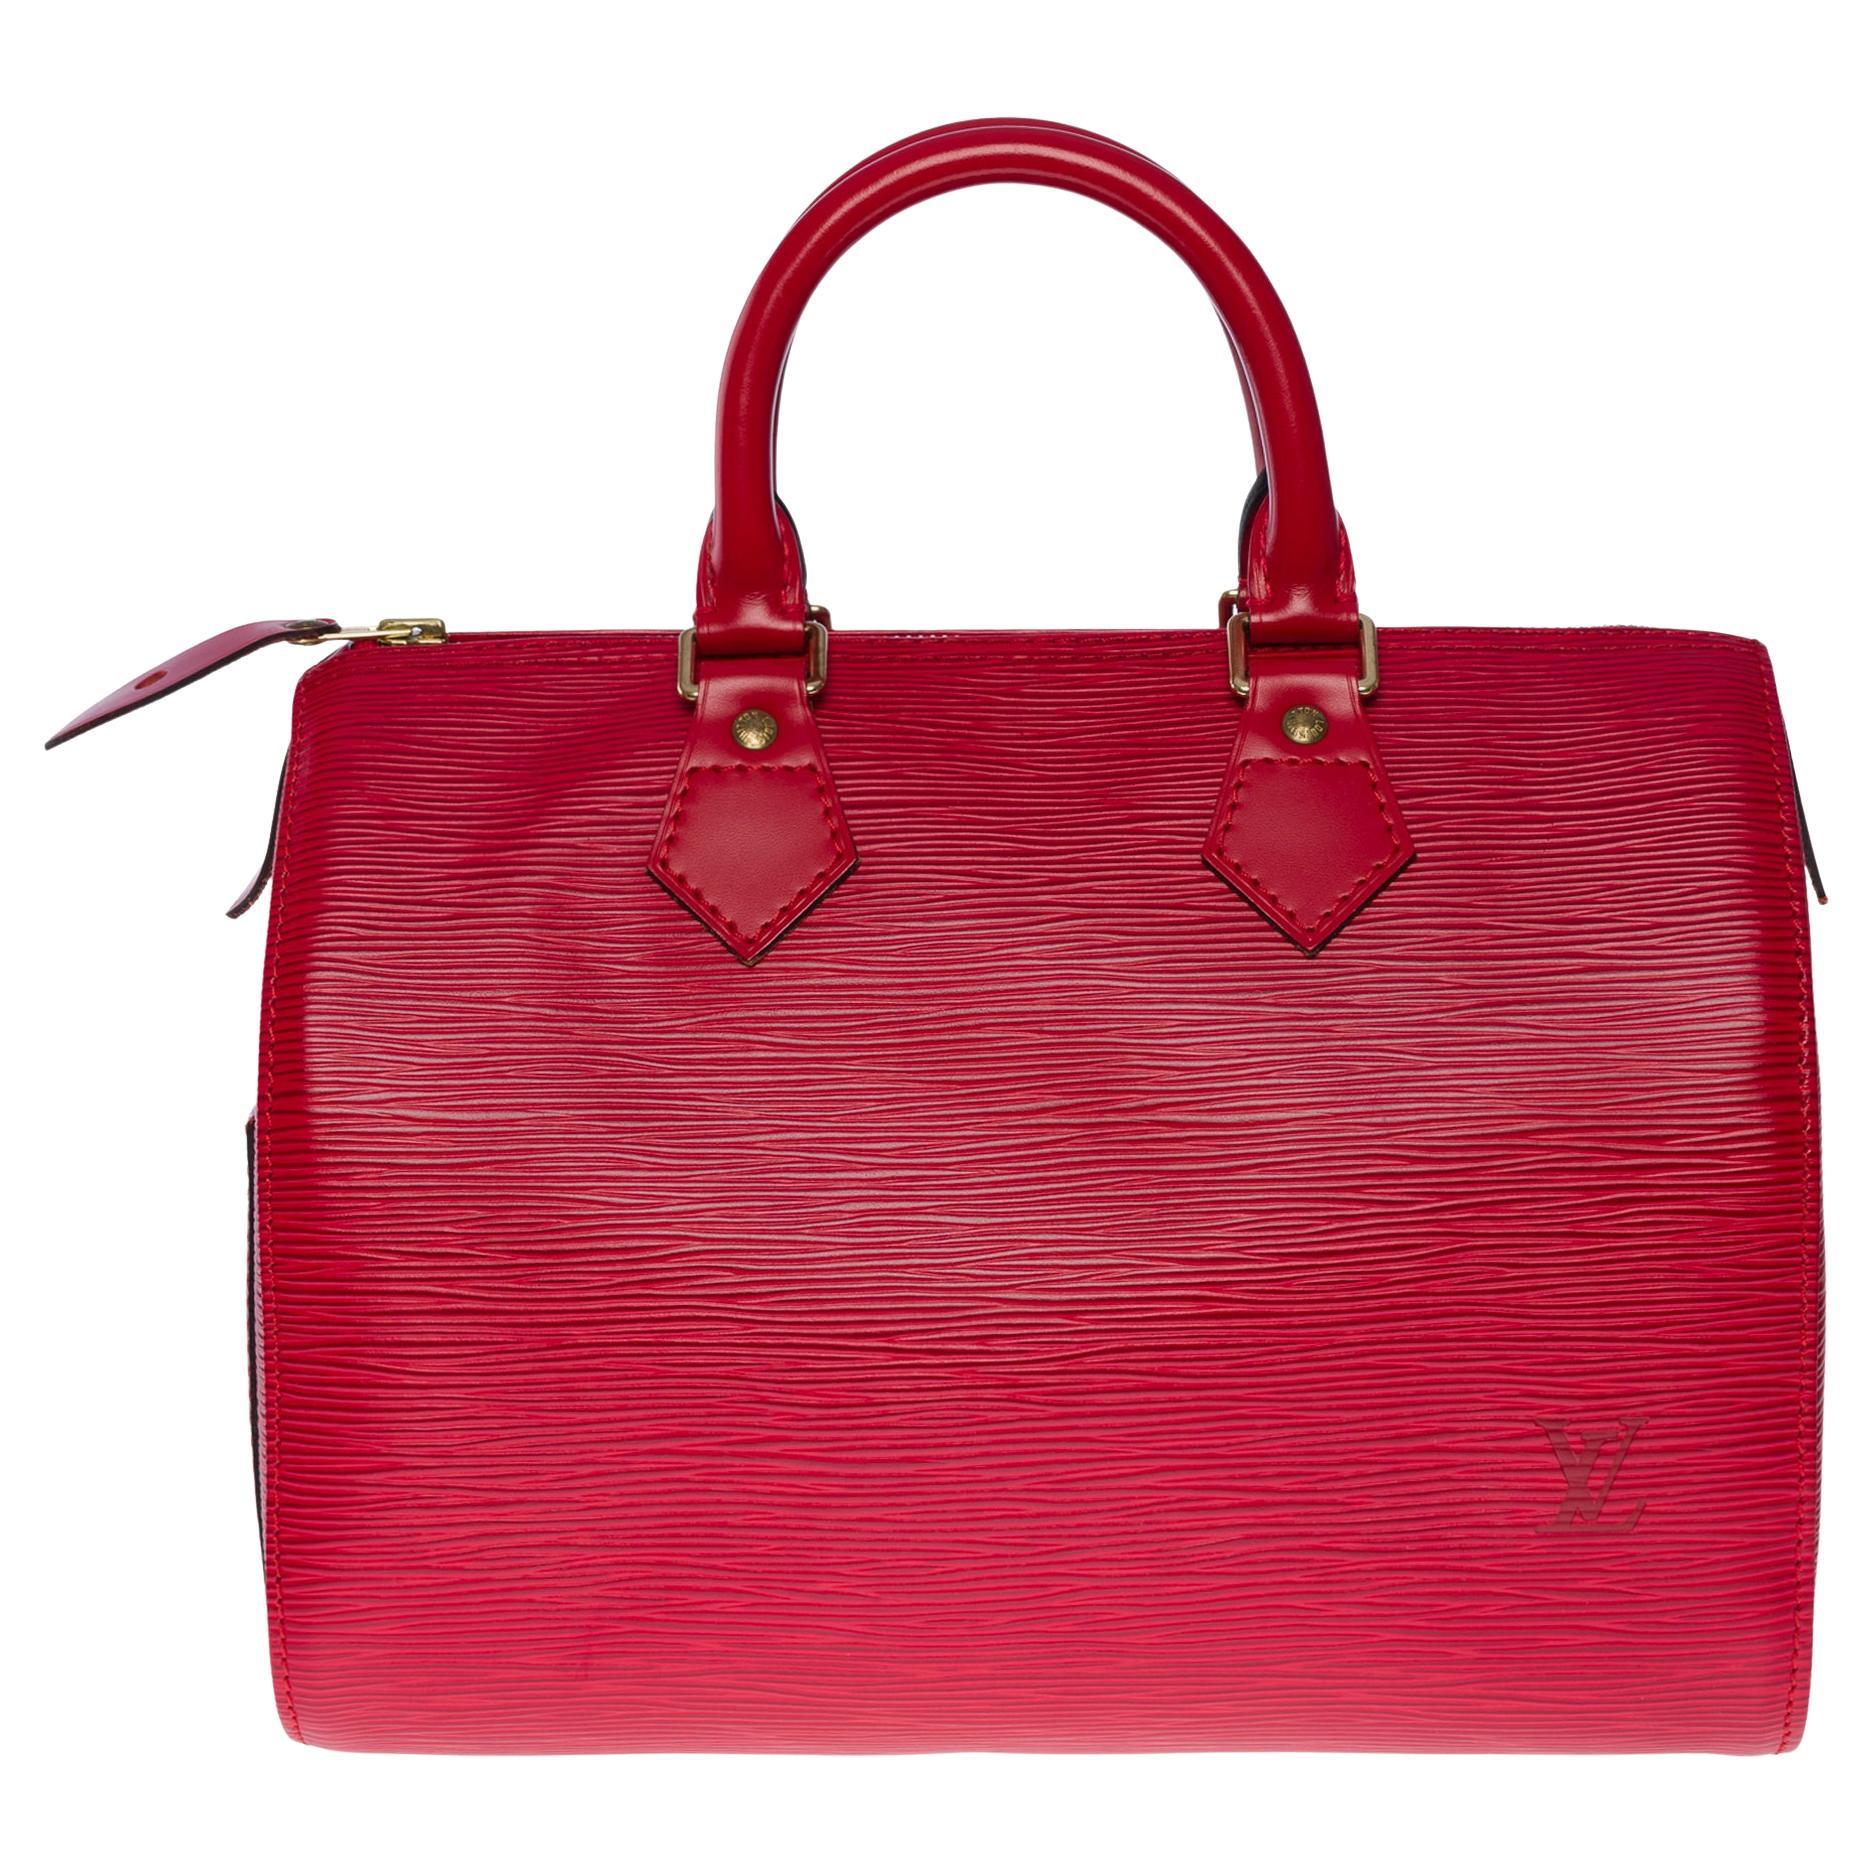 Gorgeous Louis Vuitton Speedy 25 handbag in red epi leather and gold hardware